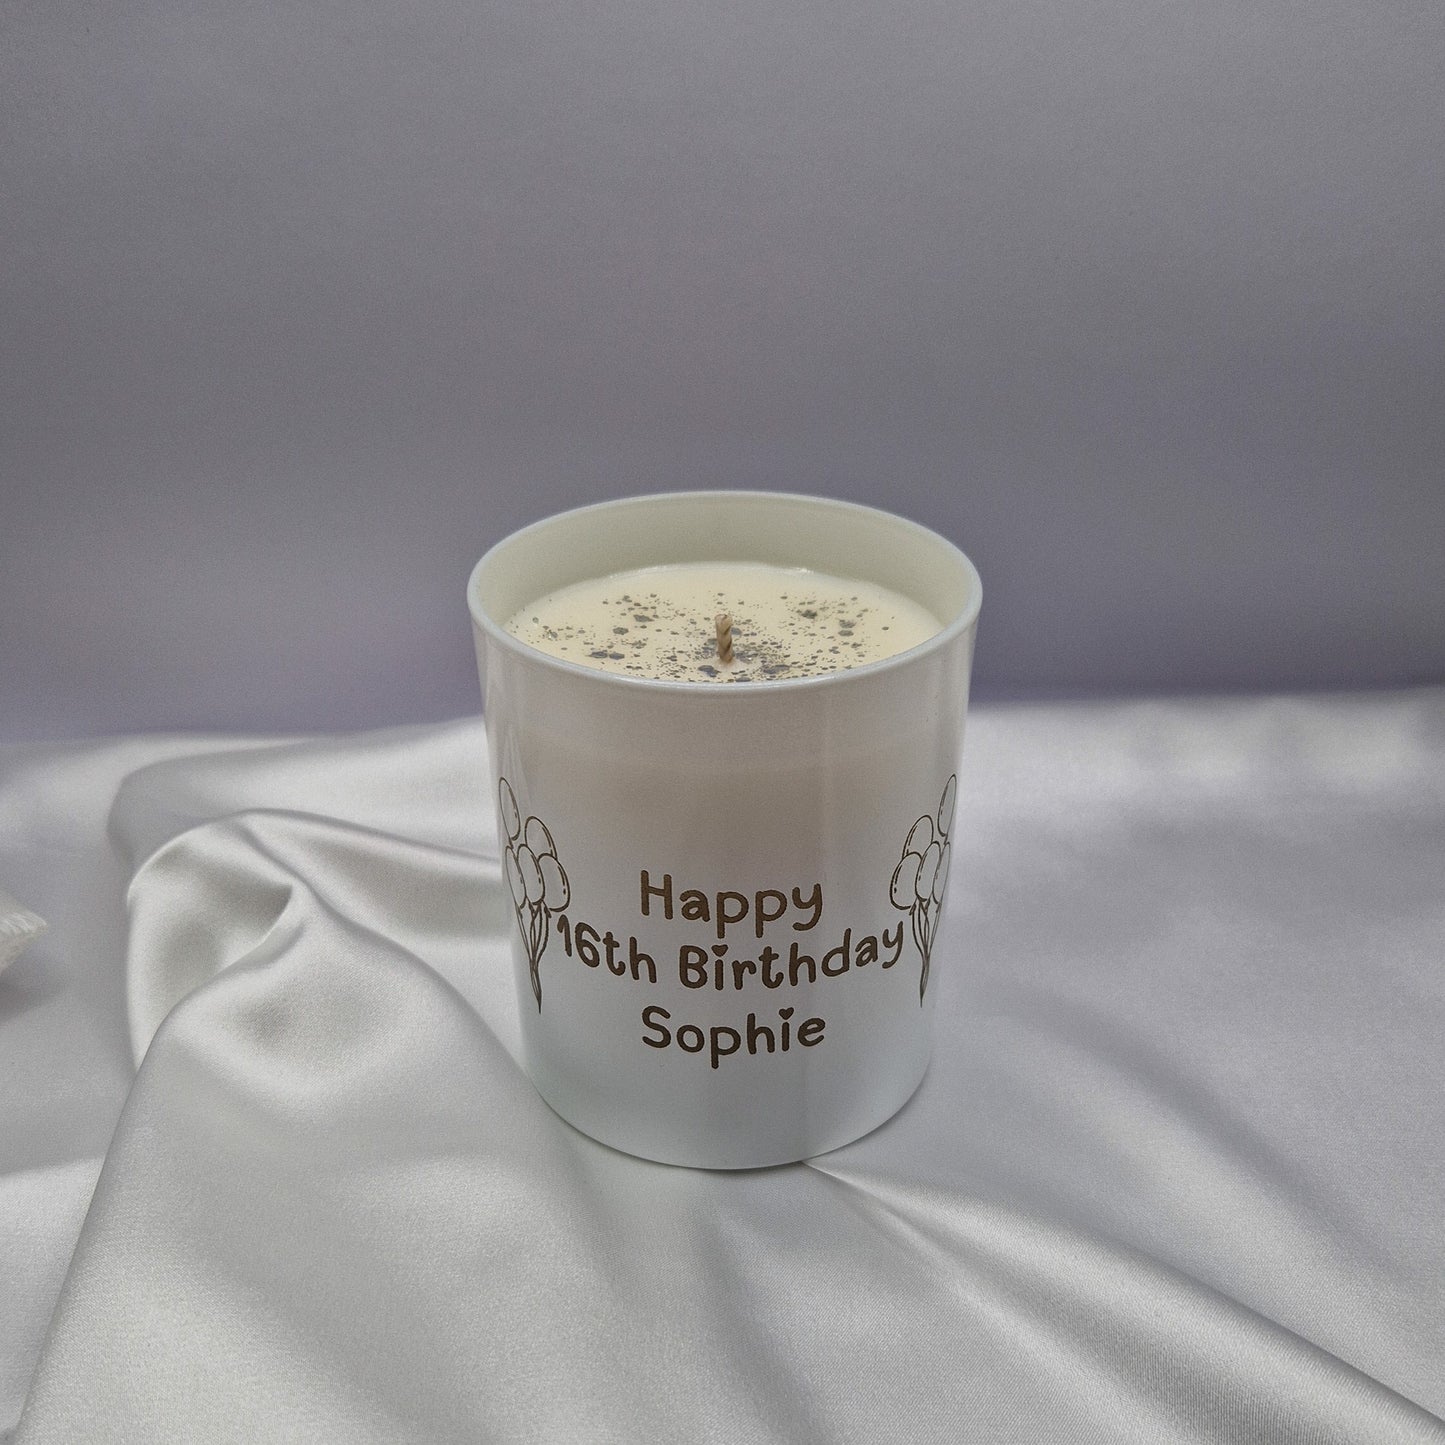 Custom candle with the words Happy 16th Birthday Sophie